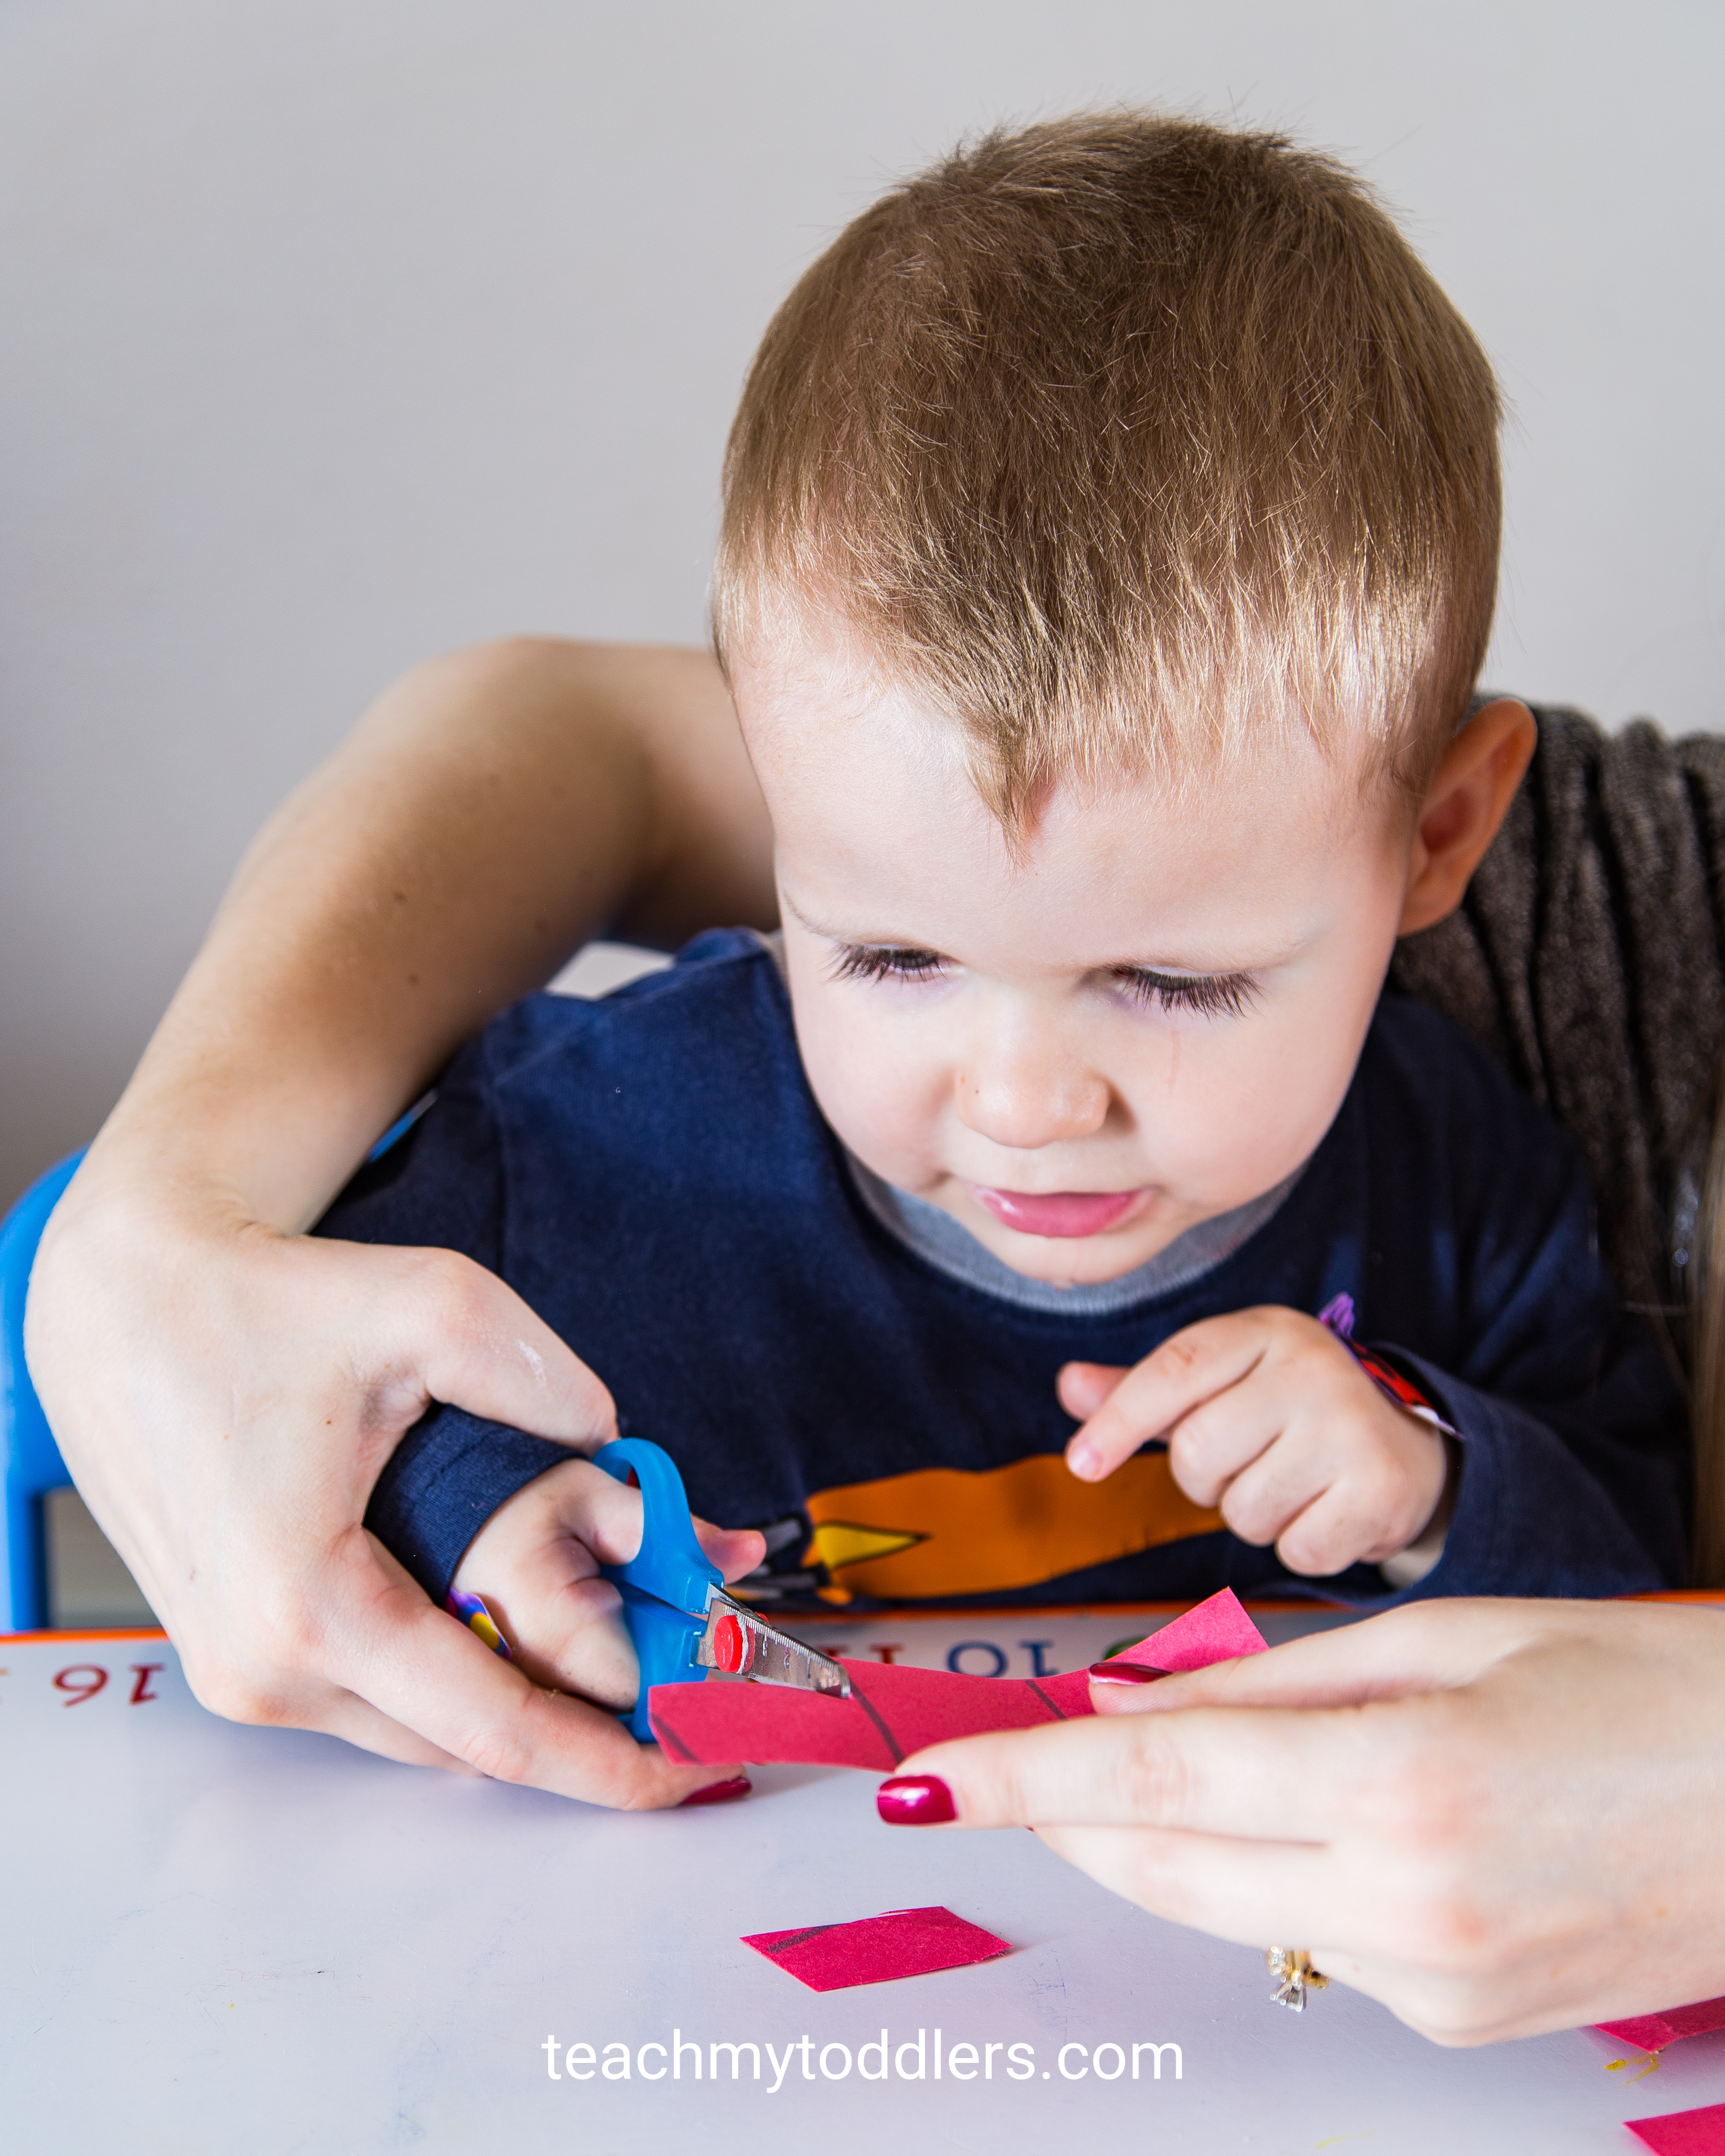 Use this fun cutting practice to teach toddlers shapes